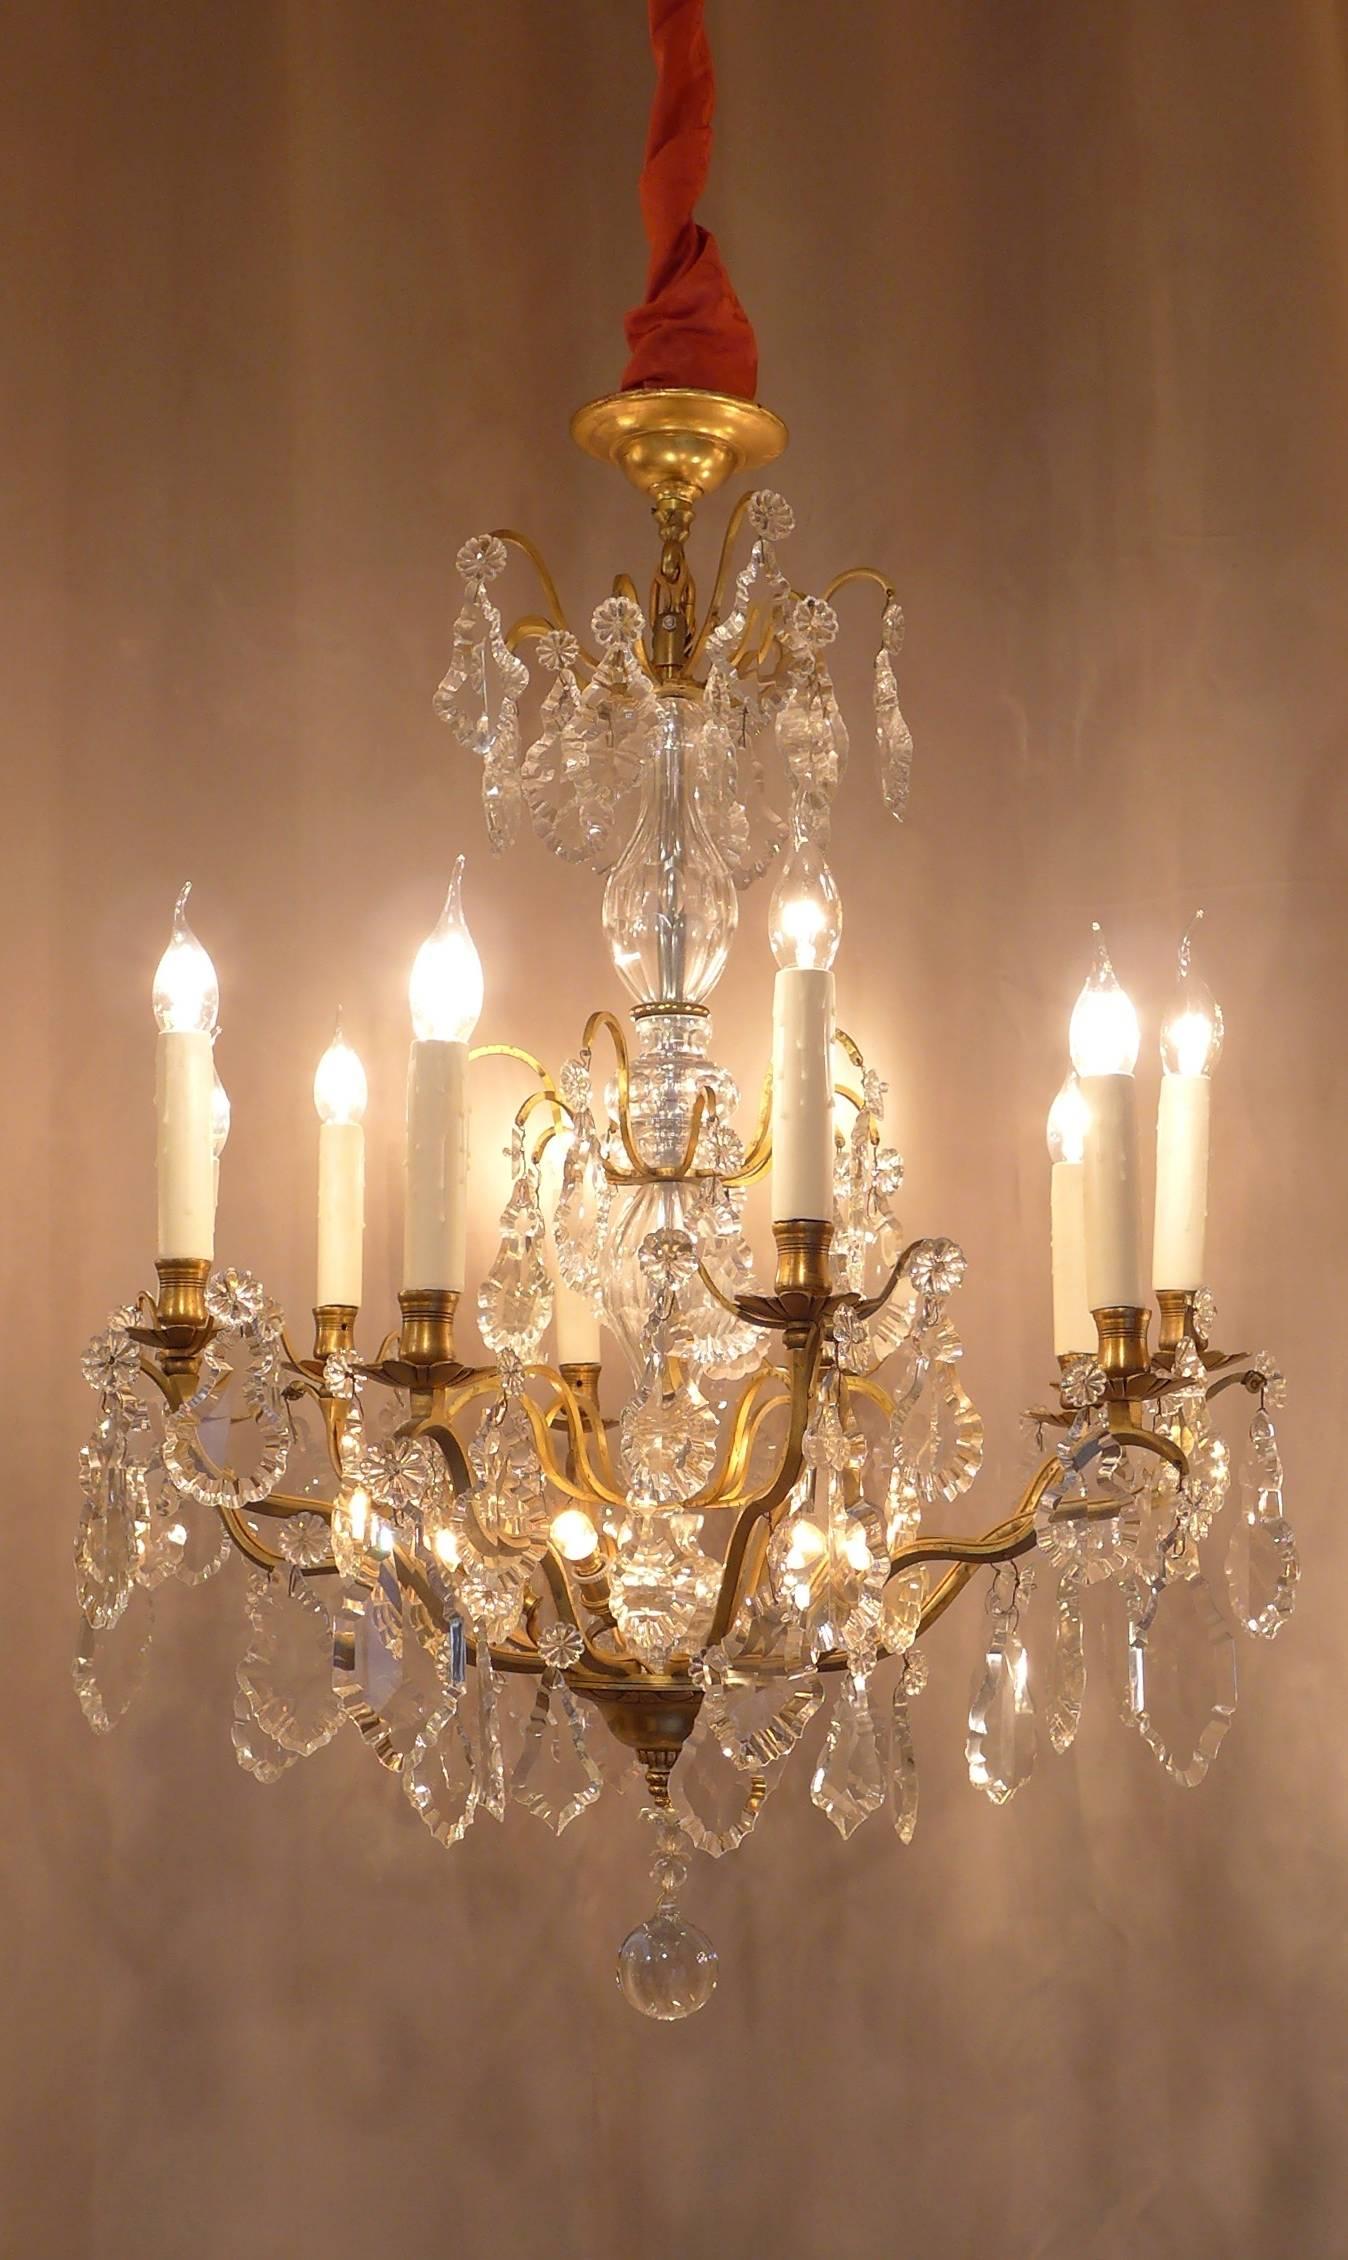 Lovely early-20th century, pair of original gilt bronze and crystal chandeliers in the classical Louis XVI style with interesting dimensions of 37.40 in. height. Each chandelier is composed of ten-arm lights, five internal light in the center, lot